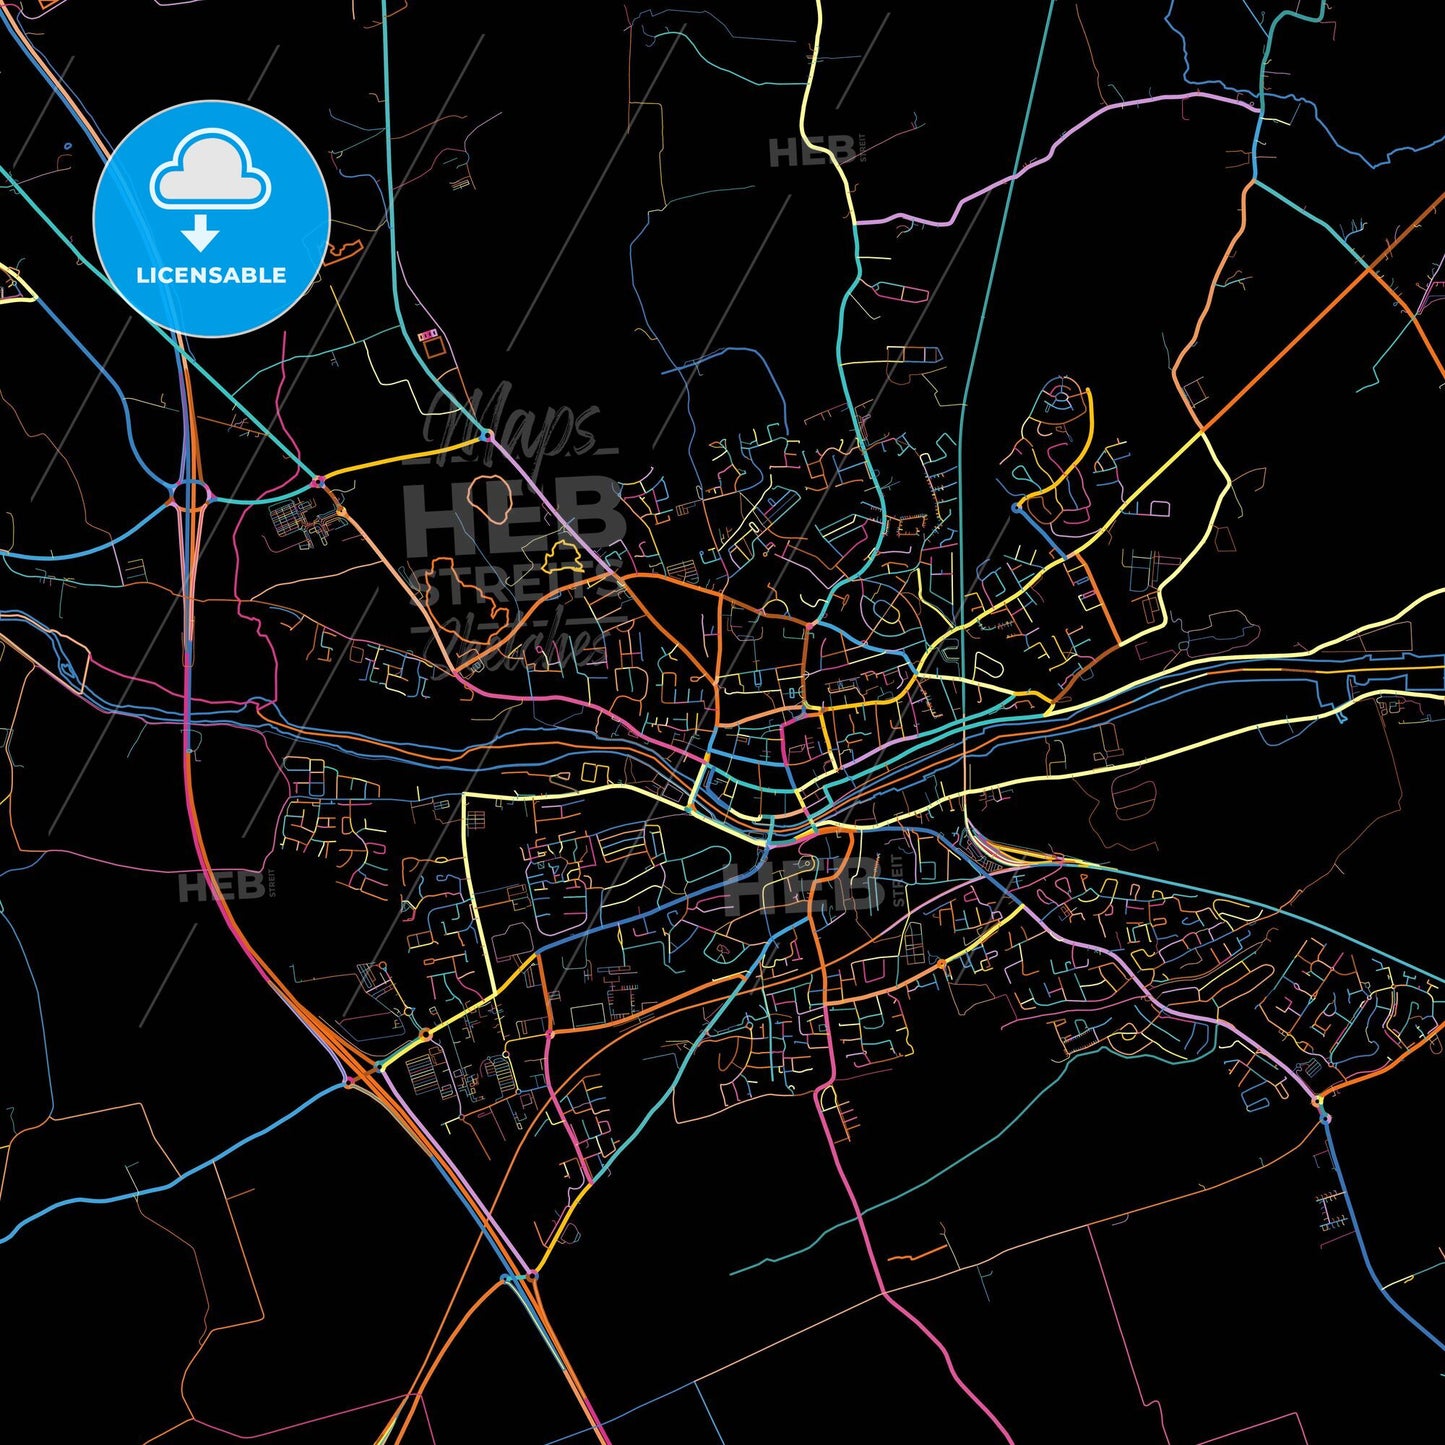 Drogheda, County Louth & County Meath, Ireland, colorful city map on black background